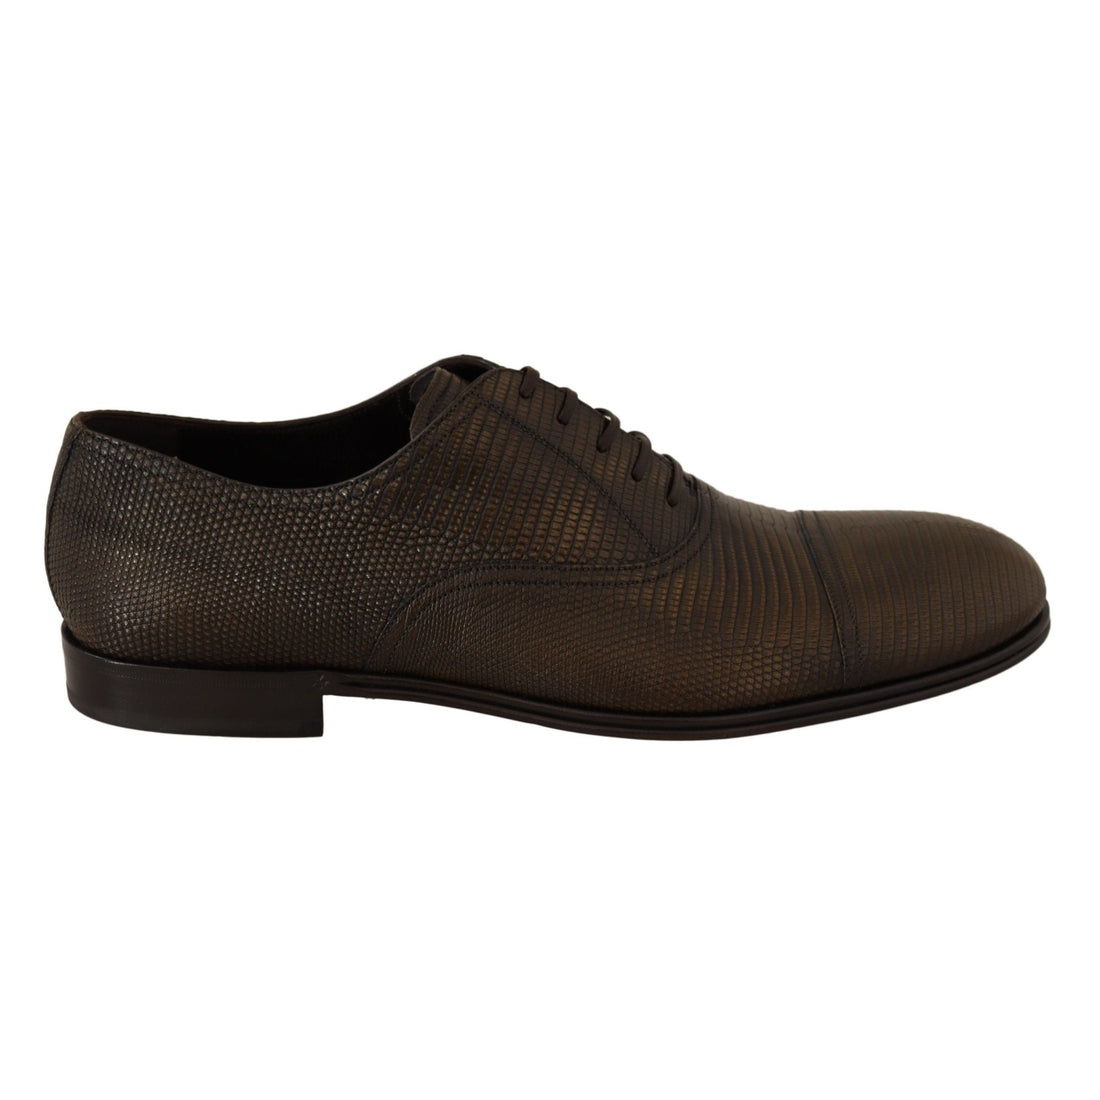 Dolce & Gabbana Brown Lizard Leather Dress Oxford Shoes - Paris Deluxe